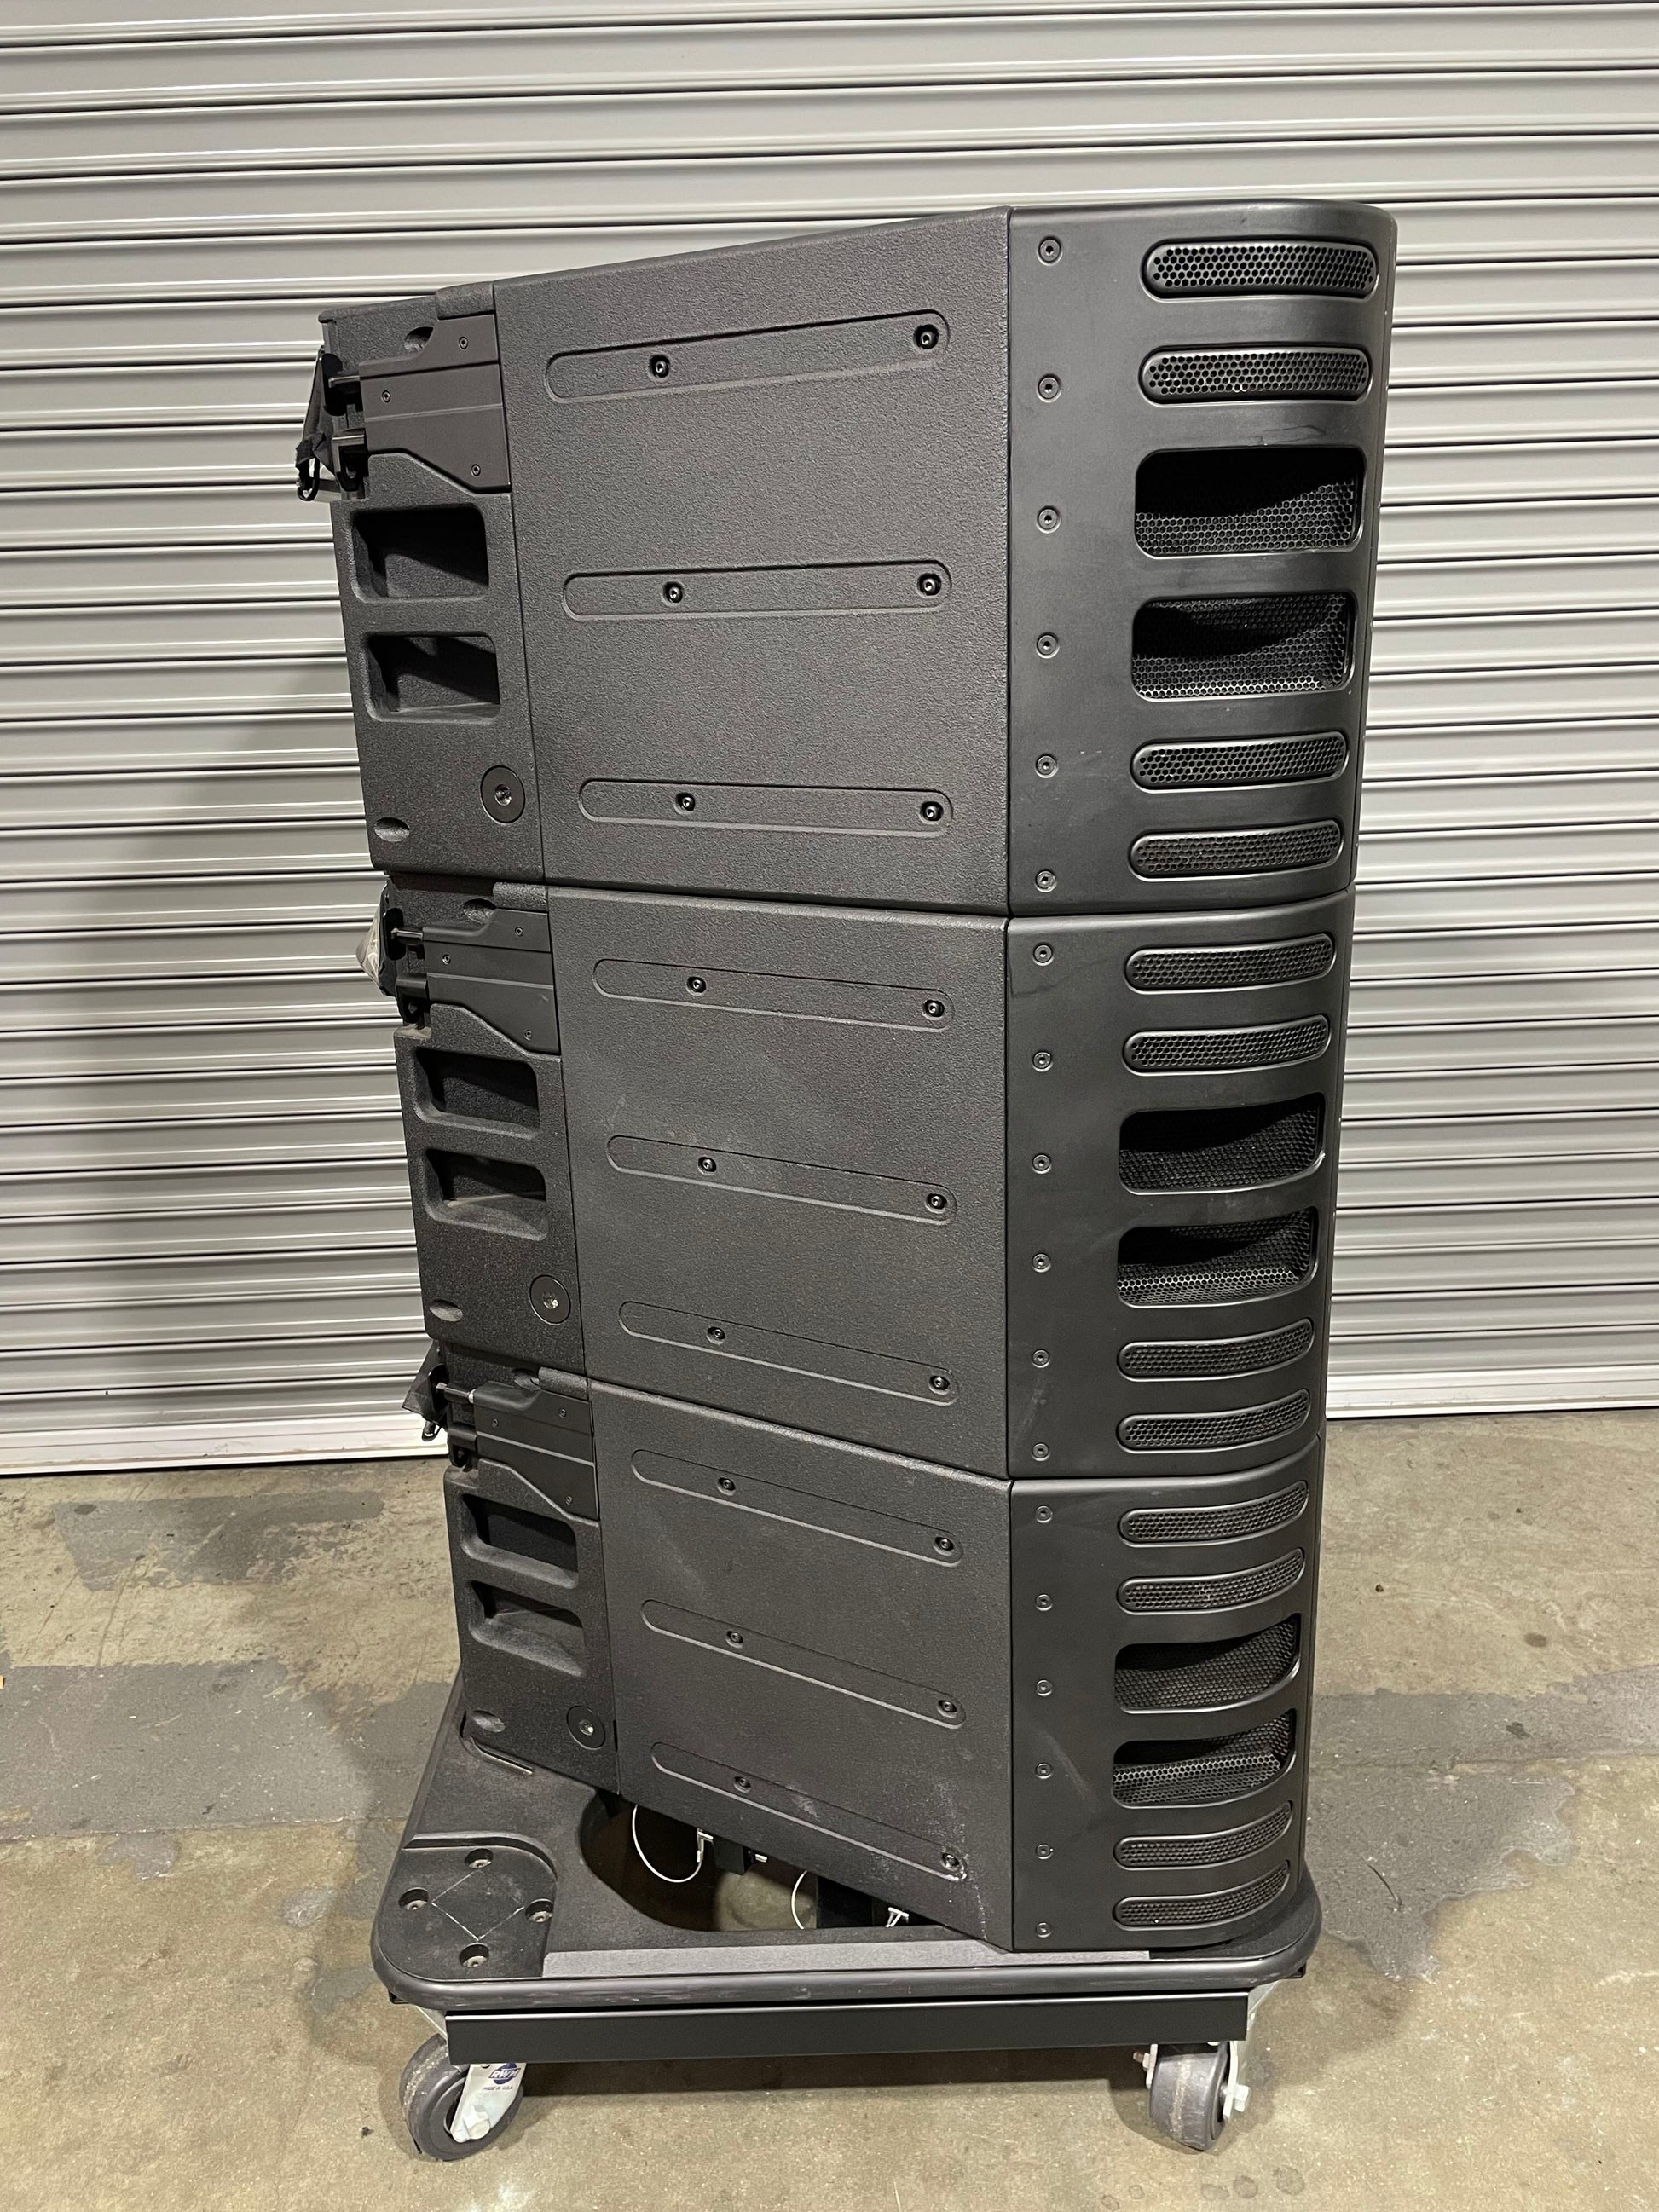 Used EAW Anya 24x 3-Way Full-Range Adaptive Array System for Sale. 					We Sell Professional Audio Equipment. Audio Systems, Amplifiers, Consoles, Mixers, Electronics, Entertainment, Sound, Live.